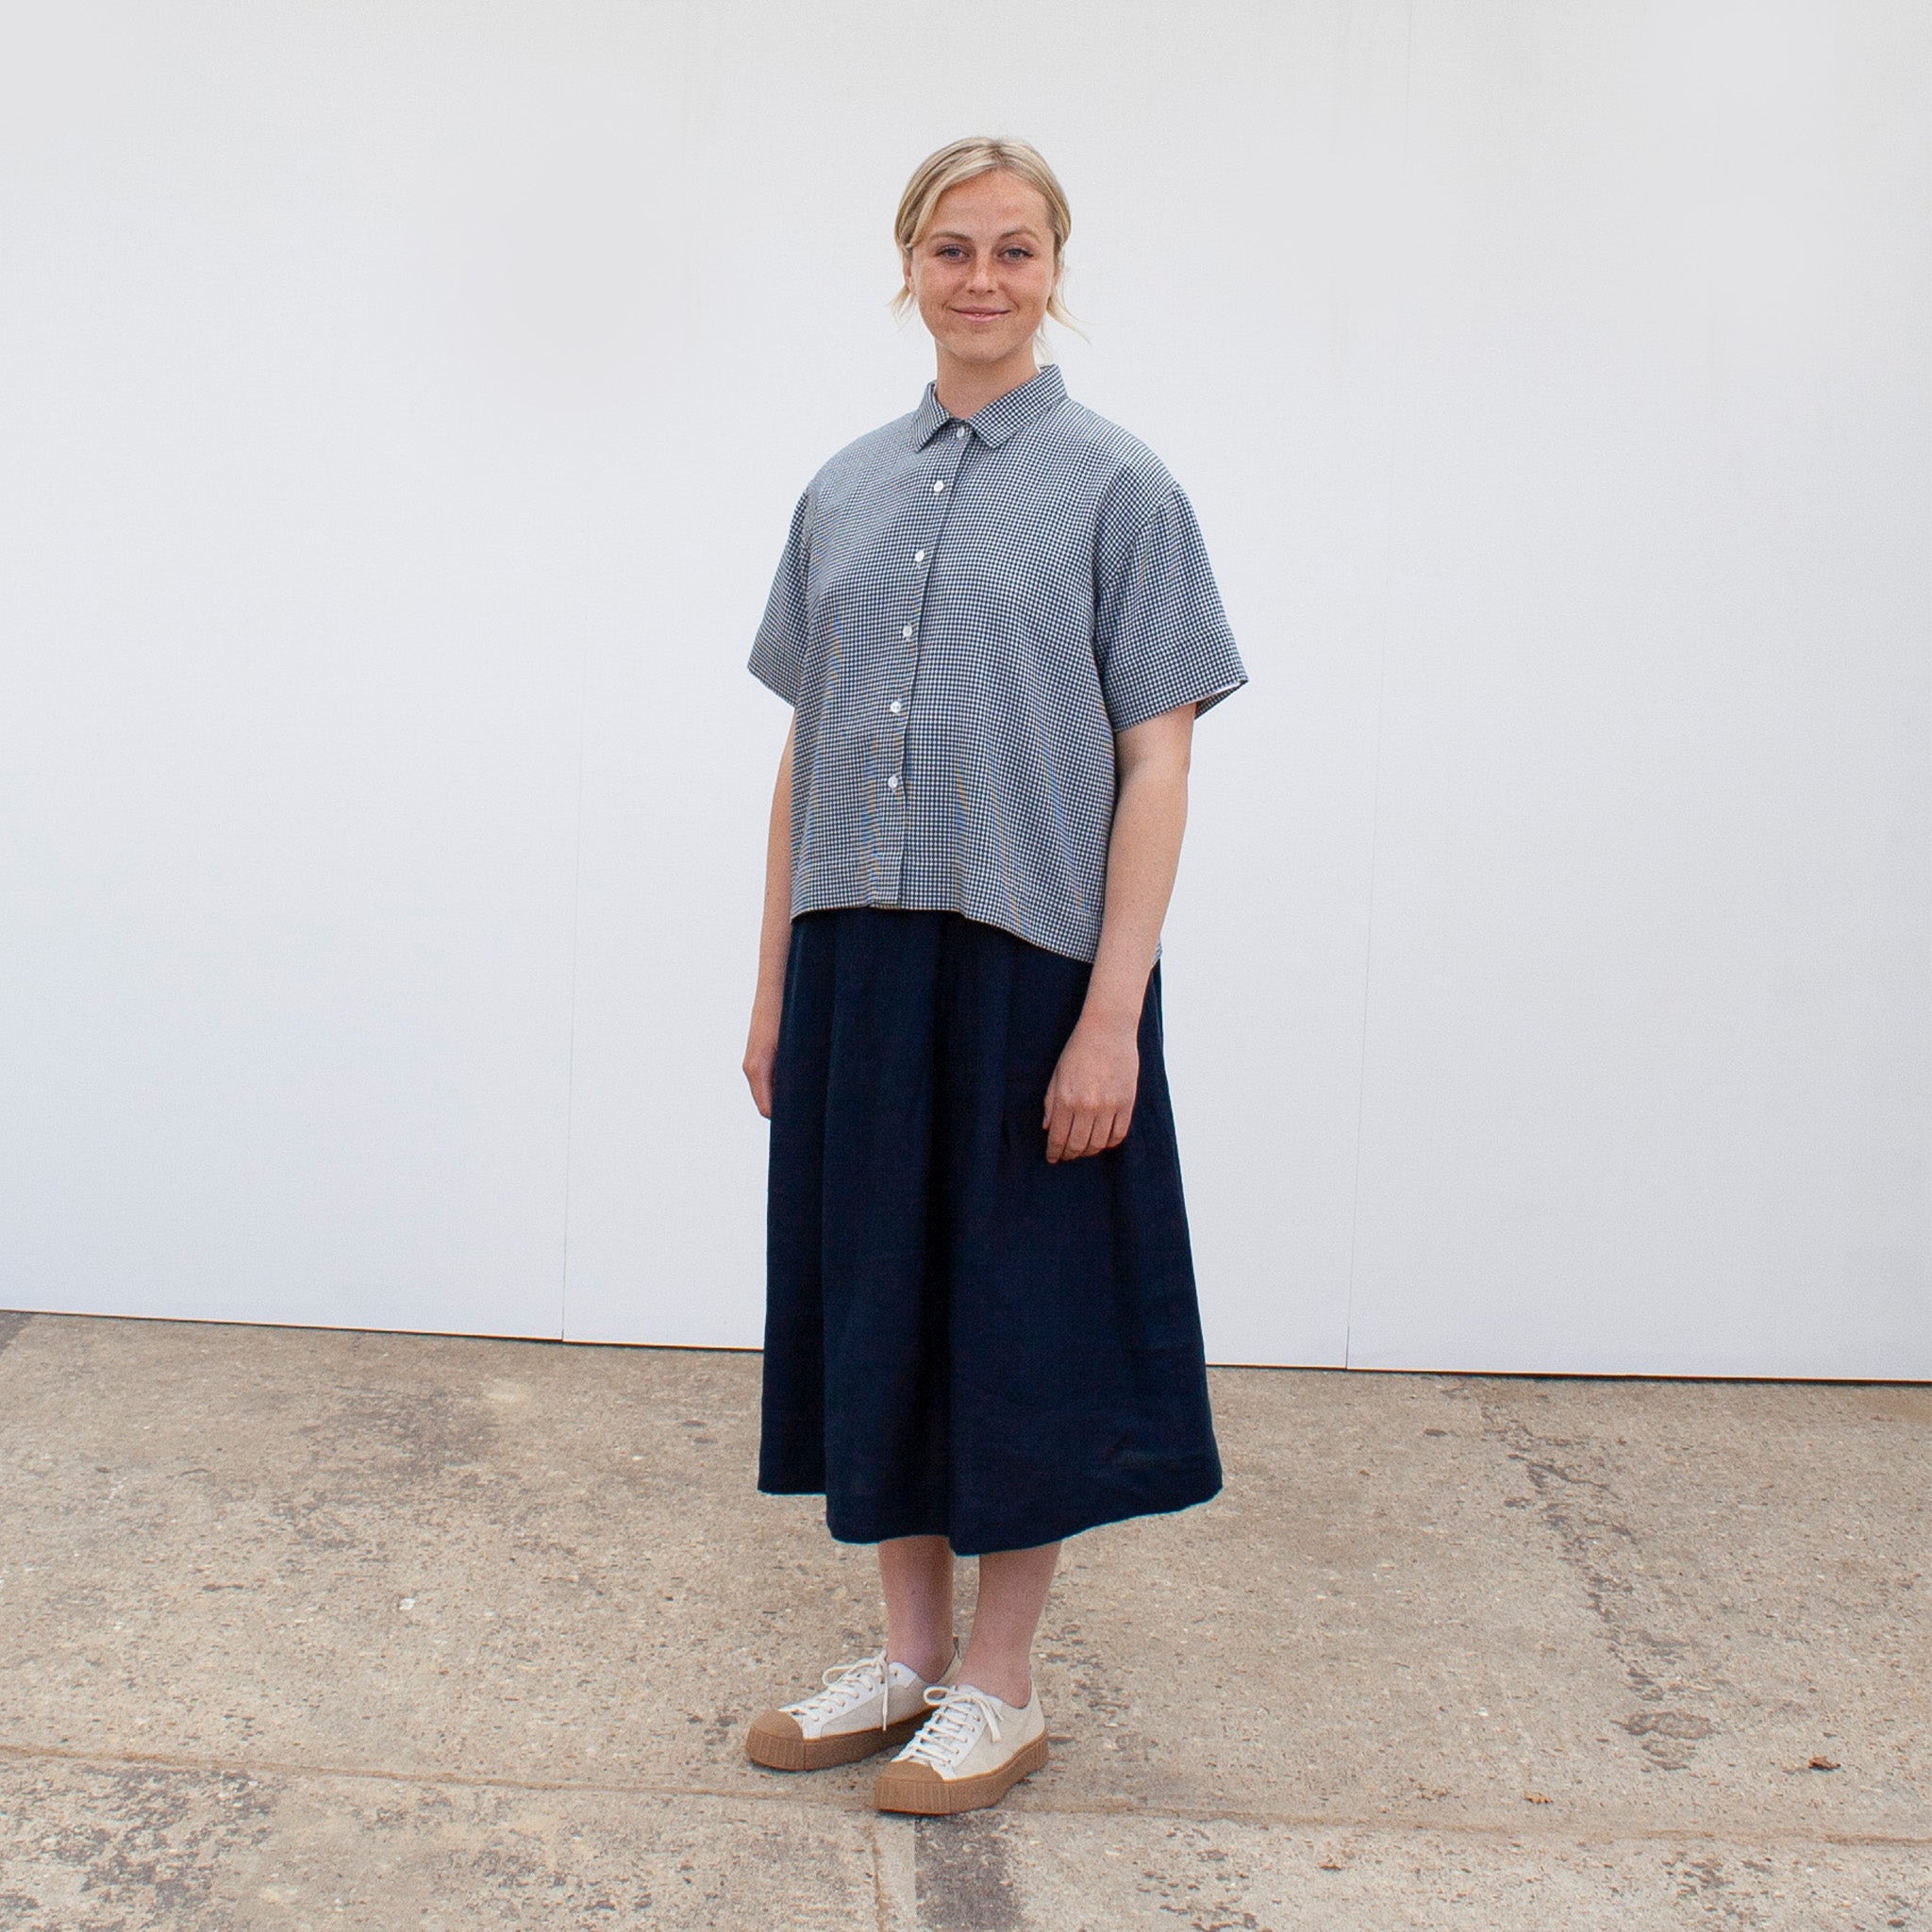 A young blond woman facing the camera wearing a ging=ham short sleeved shirt and a navy linen skirt